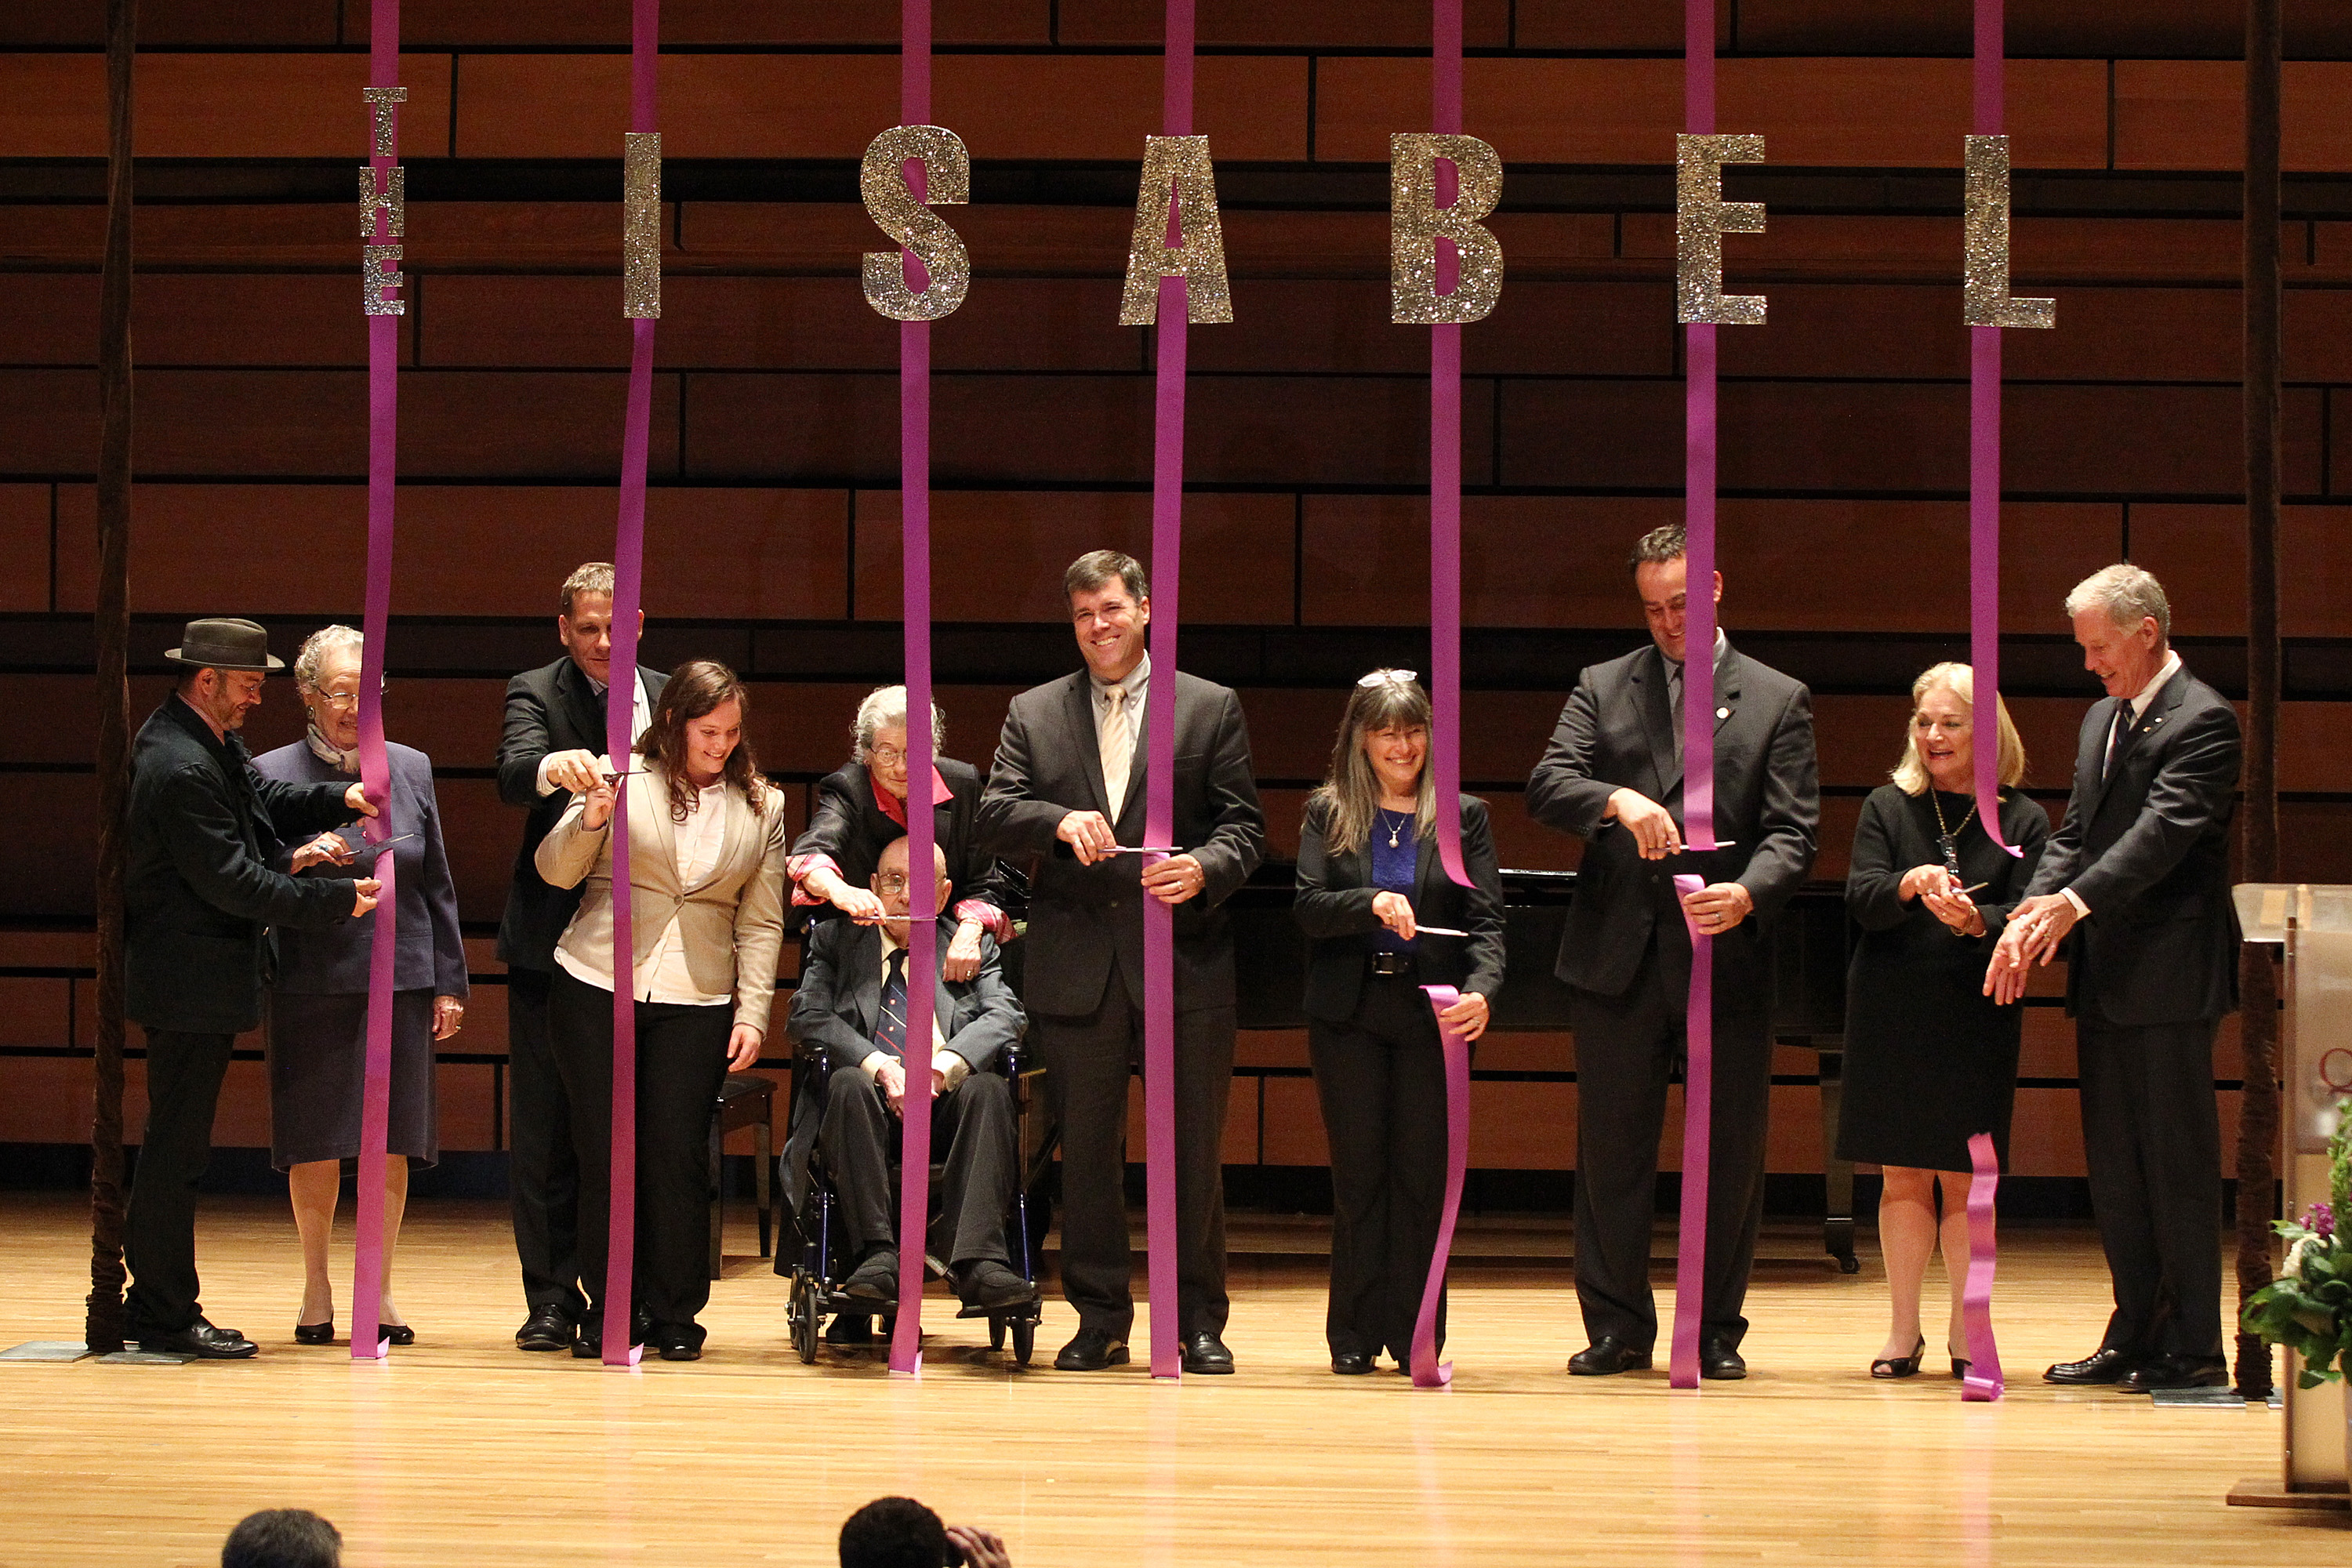 From left to right: Craig Dykers, Founding Partner of Snøhetta, Marlene Brant Castellano, Elder and Co-Chair of the Aboriginal Council of Queen's University, Daniel Woolf, Principal and Vice-Chancellor, Queen's University, Daphne Kennedy, Music student at Queen¿s University, Isabel Bader, Alfred Bader, Pierre Lemieux, Member of Parliament for Glengarry-Prescott-Russell, Sophie Kiwala, MPP for Kingston and the Islands and Parliamentary Assistant to the Minister of Tourism, Culture and Sport, His Worship Mark Gerretsen, Mayor of the City of Kingston, Barbara Palk, Chair of the Board of Trustees of Queen's University, and Jim Leech, Chancellor of Queen's University. Photo courtesy of Lars Hagberg/Queen¿s University